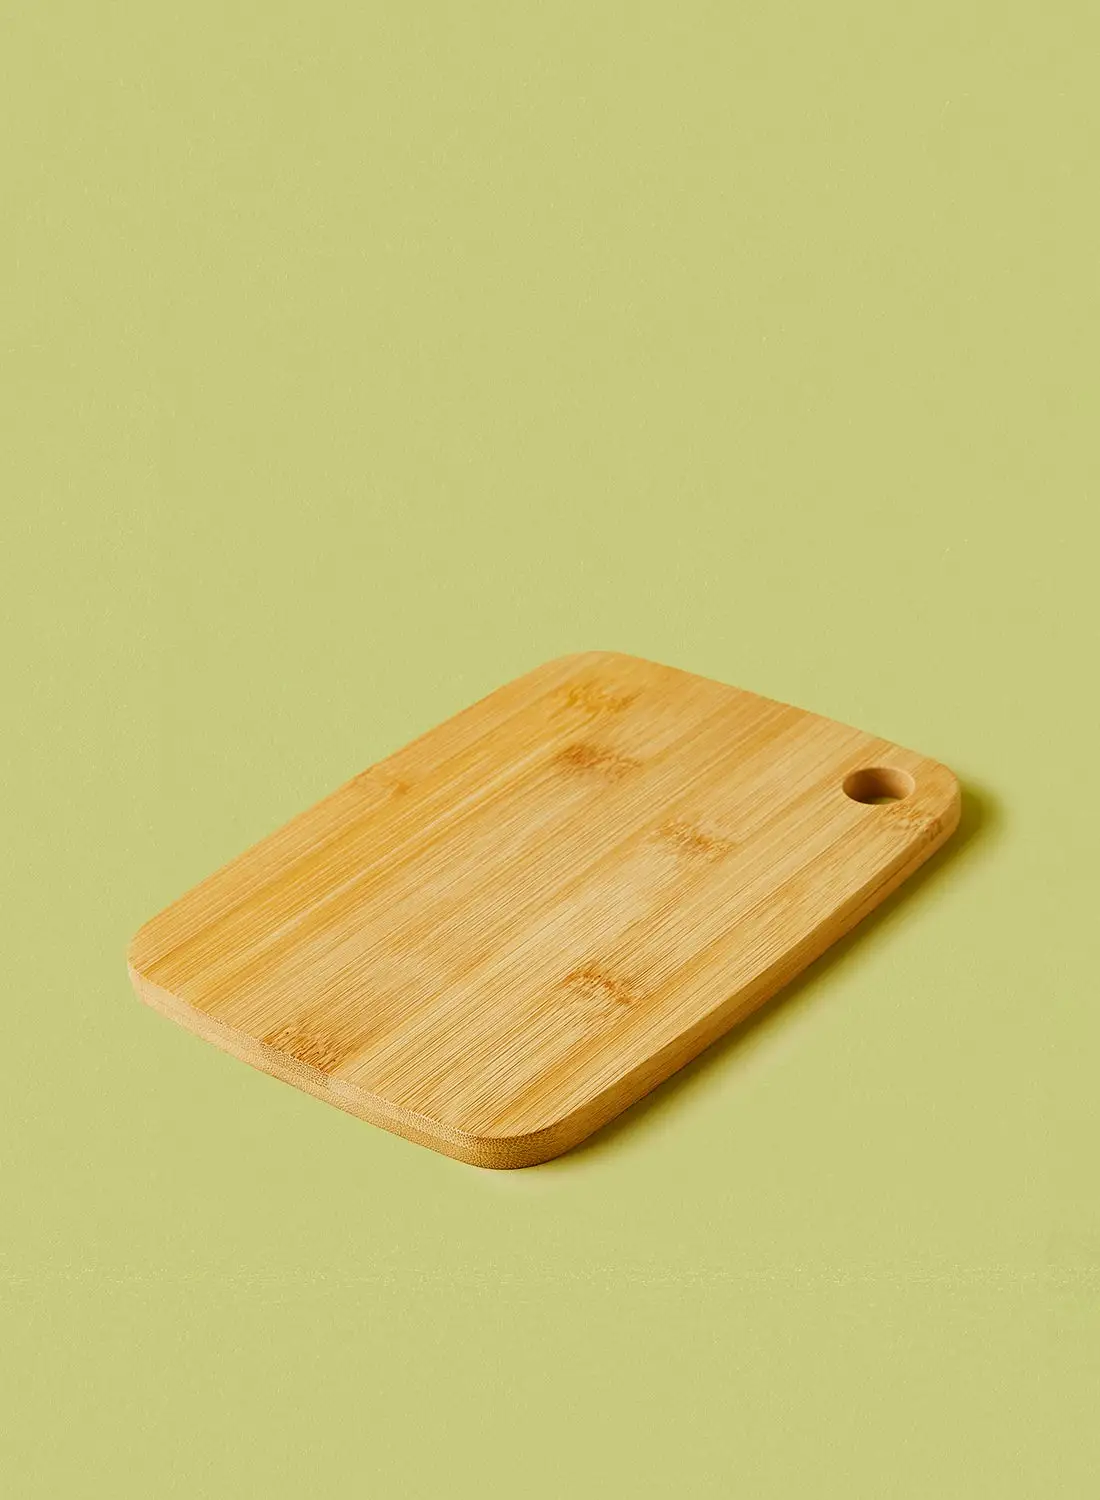 Noon East Cutting Board - Made Of Wooden - For Cutting And Chopping Vegetables And Fruits - Chopping Board - Chopping Board - Plank - Kitchen Tools - Fruits - Brown Brown 15x20x1cm